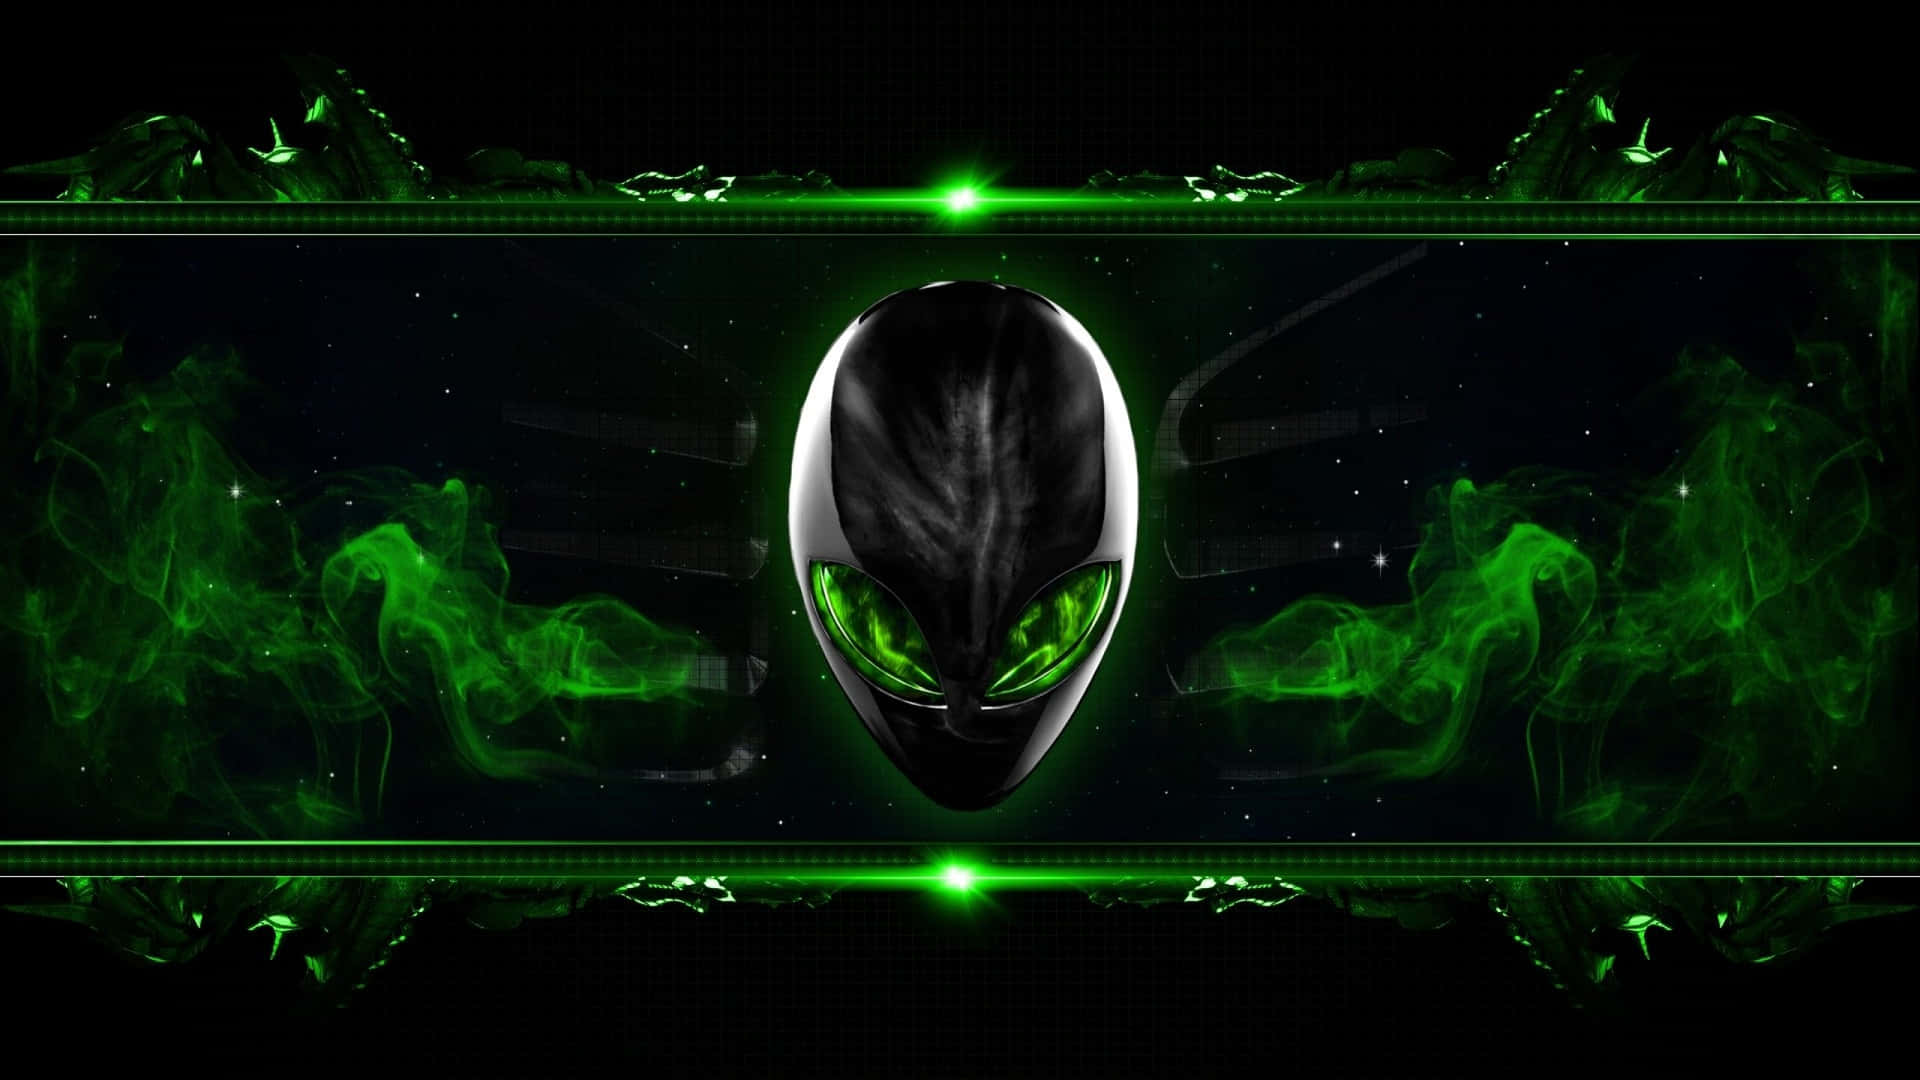 Enhance your gaming experience with Alienware laptops